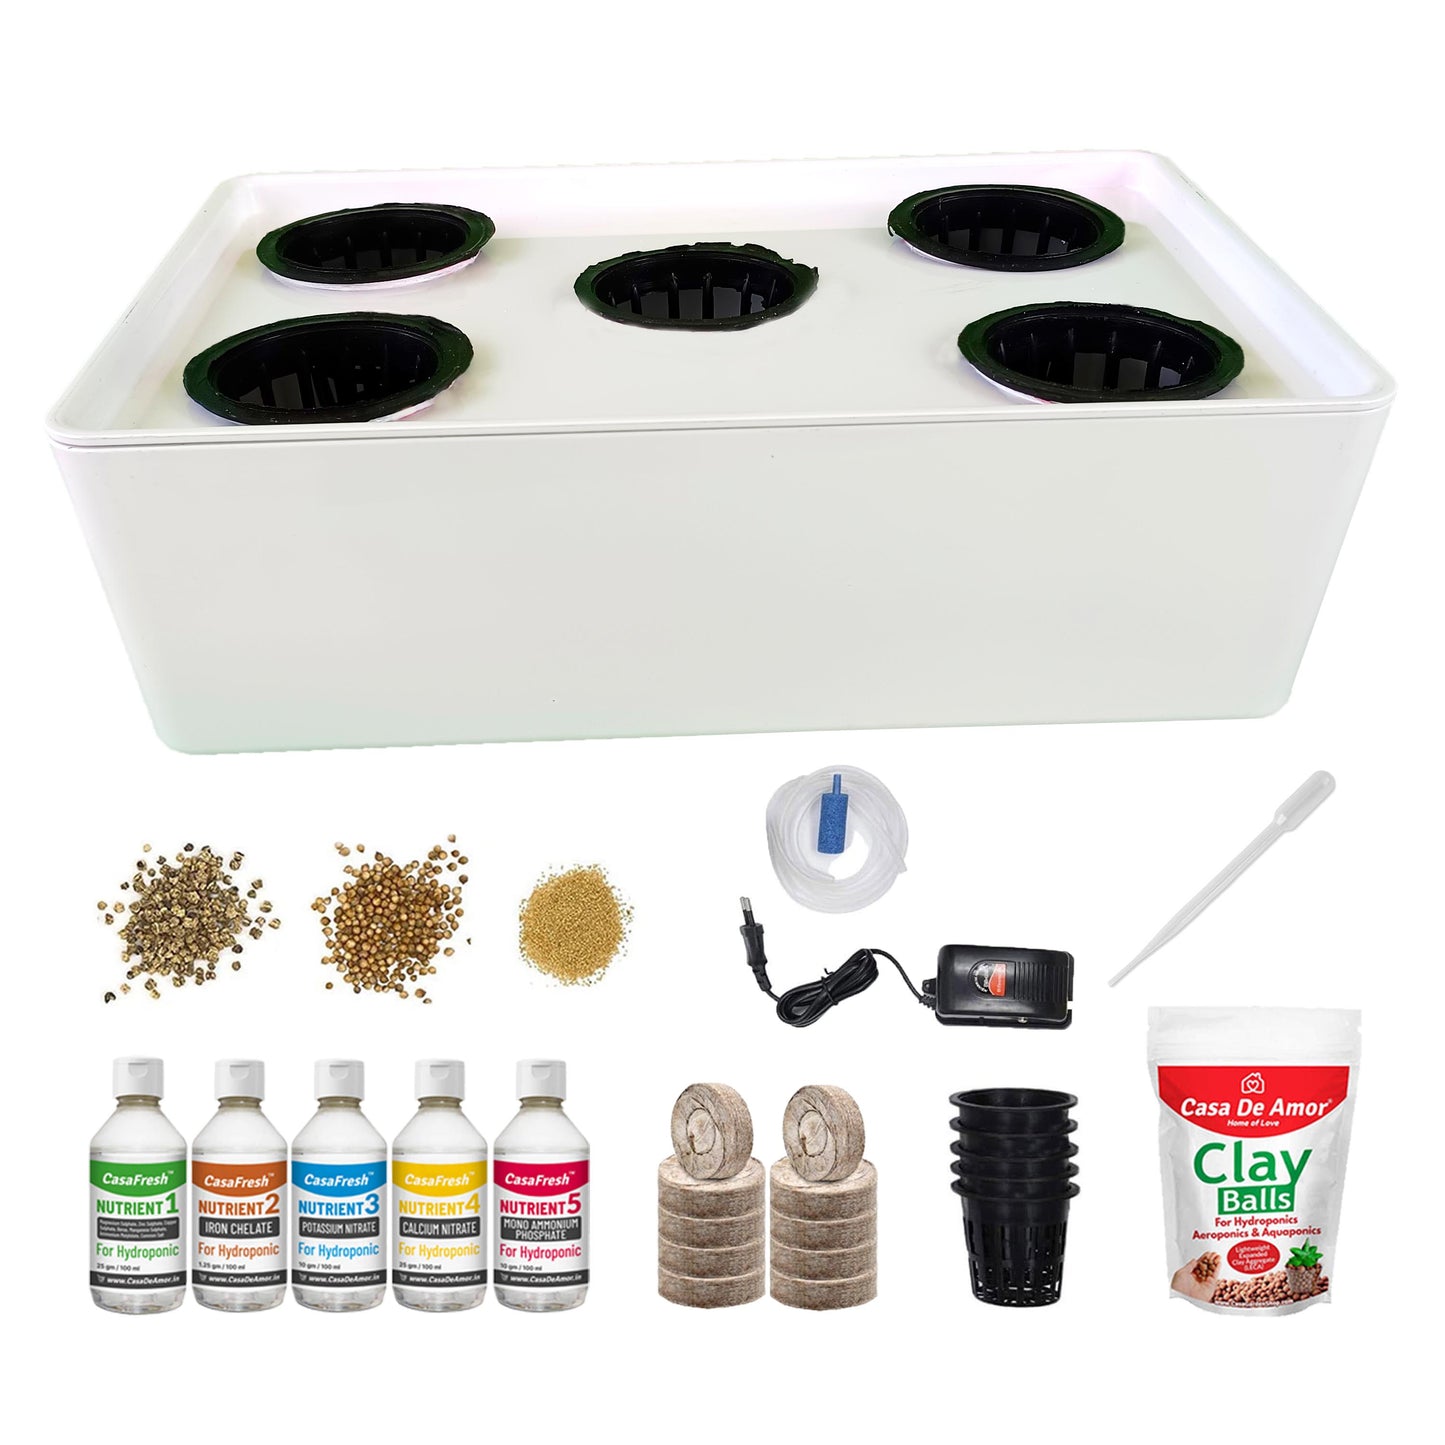 CasaFresh Hydroponic System Growing Kit for 5 Plants Herb Garden Starter Set - Beginners Hydroponic System- Reusable for Indoor/Outdoor hydroponics, Seeds Included